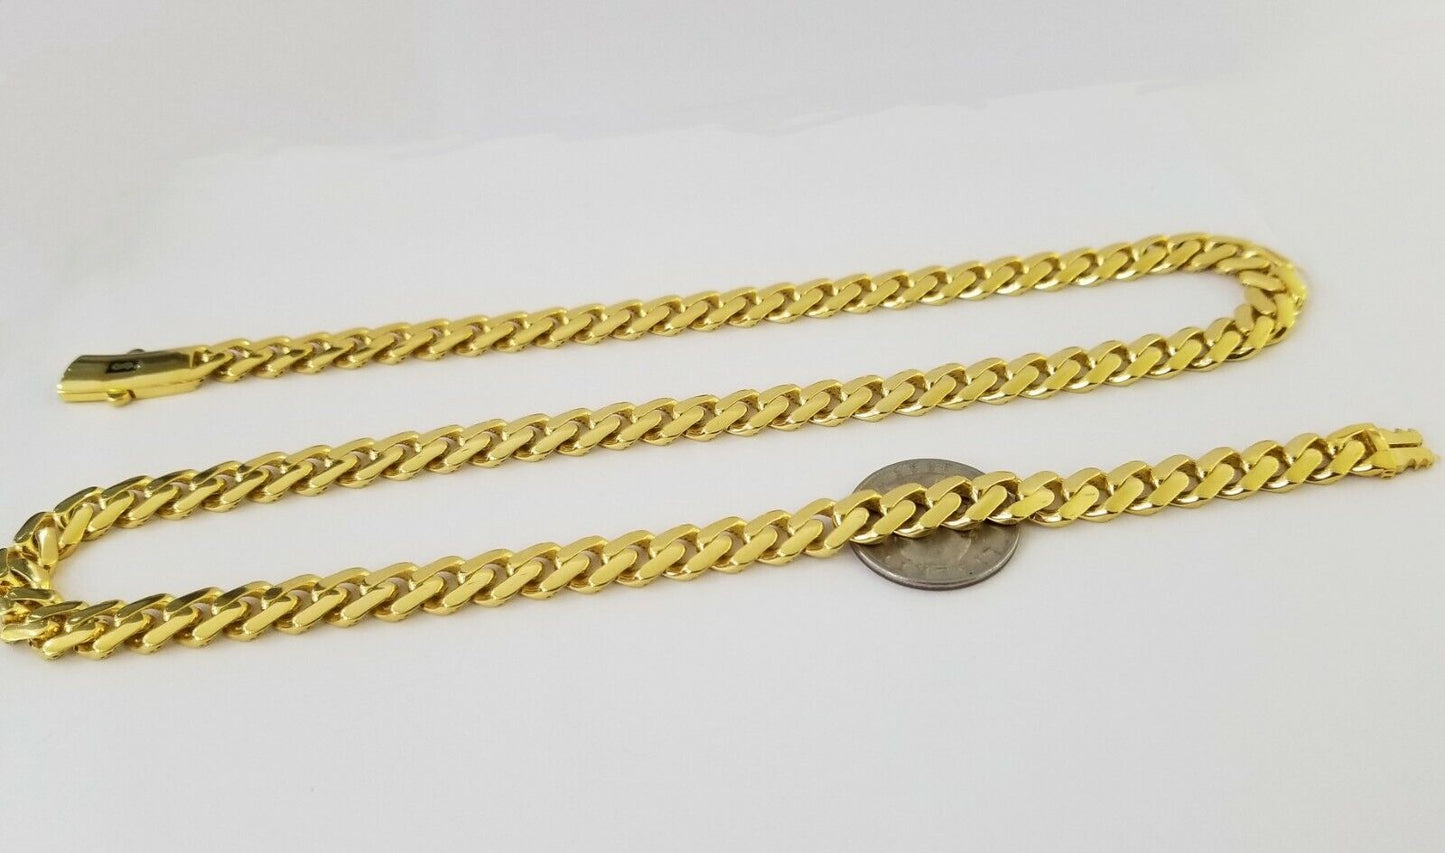 Real 10k Miami Cuban Link Monaco Chain 9mm 24" inch Box Clasp 10kt Gold necklace